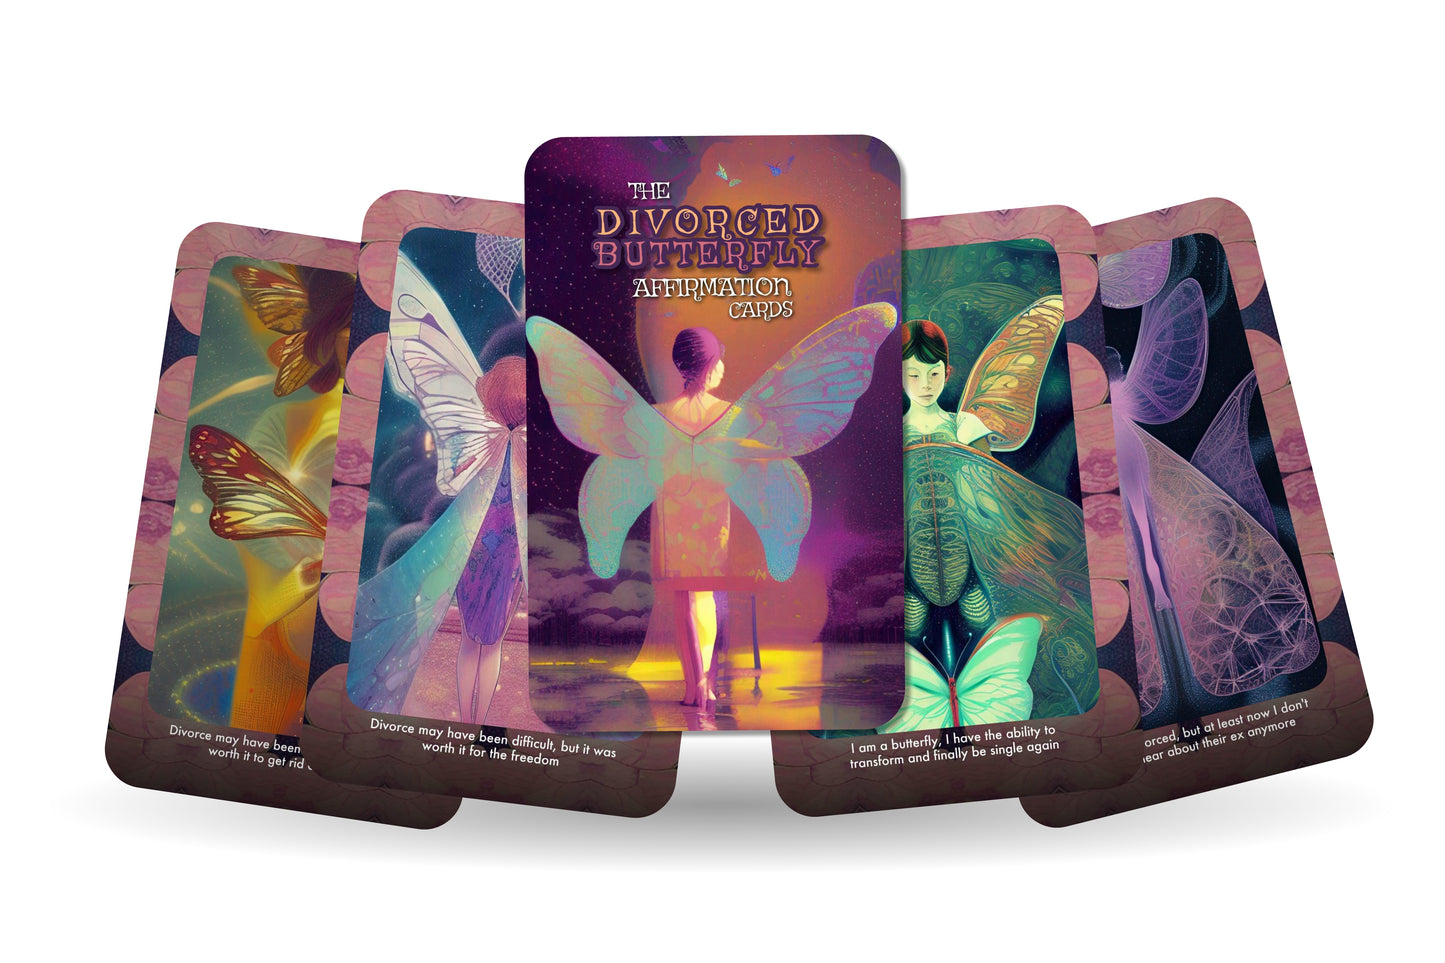 The Divorced Butterfly Affirmation Cards